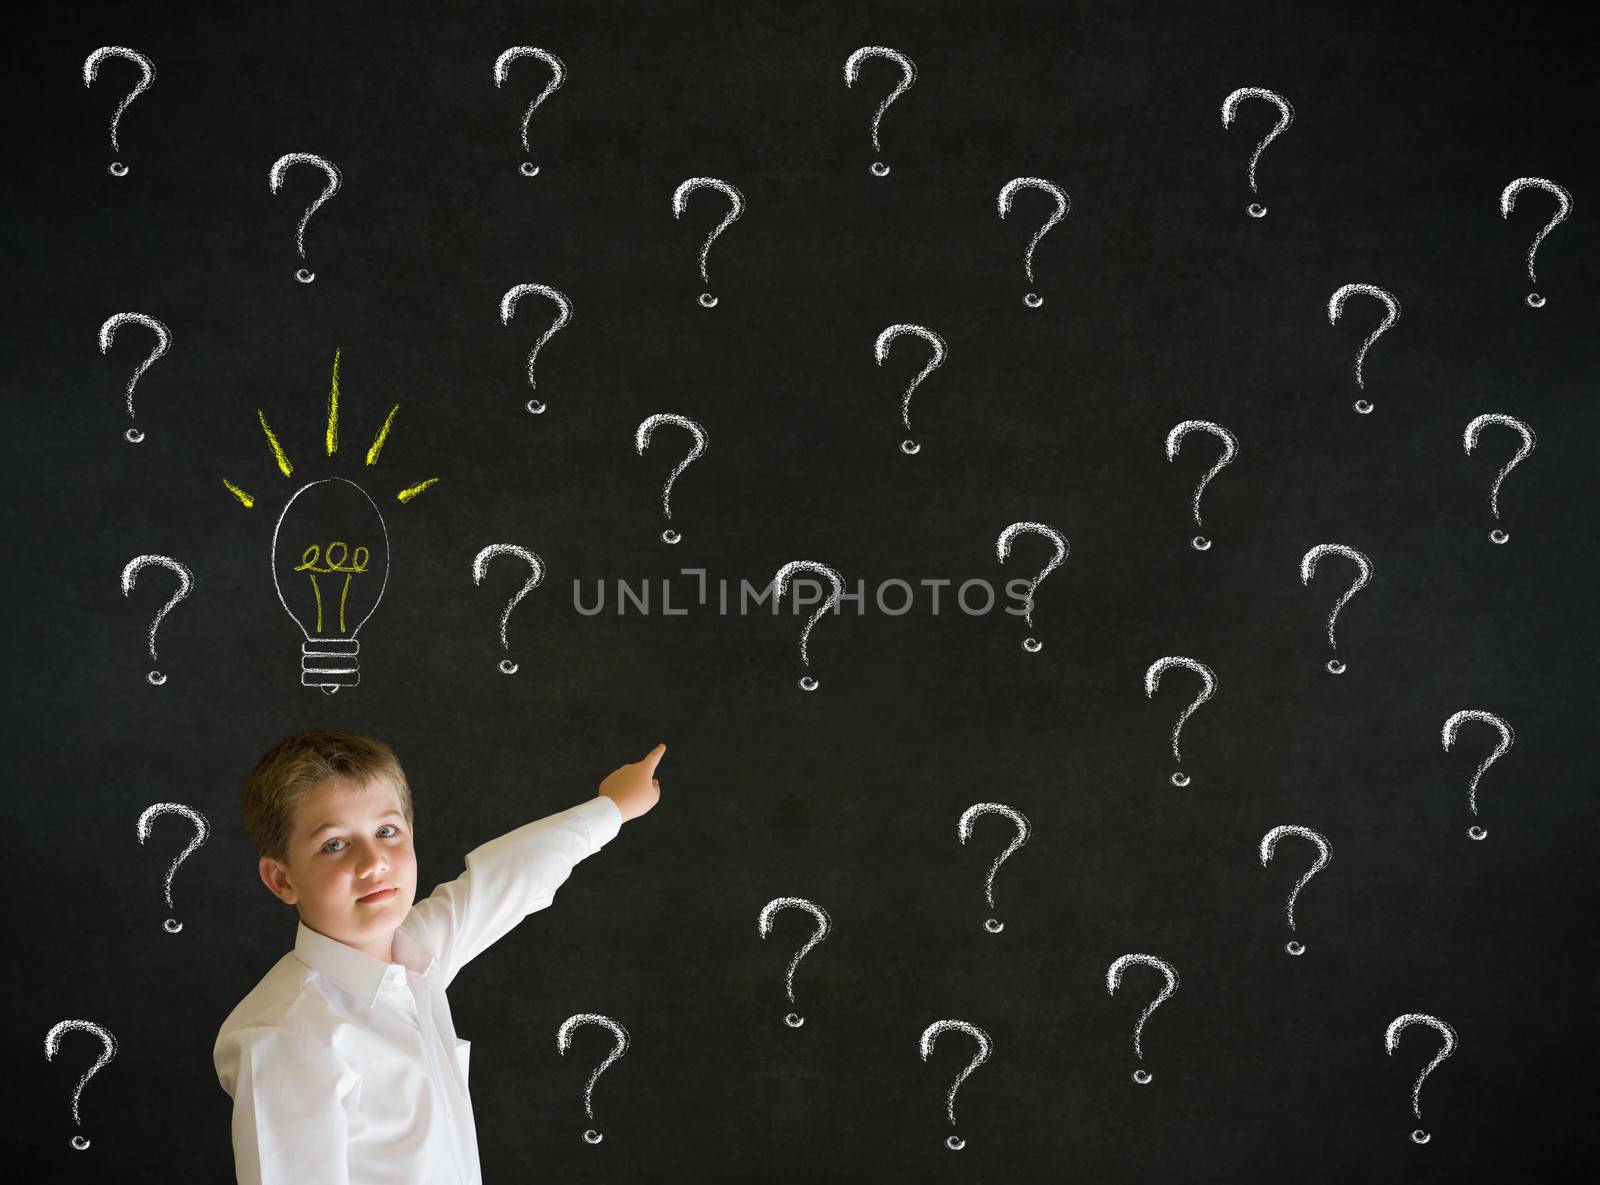 Pointing boy dressed up as business man questioning ideas on blackboard background